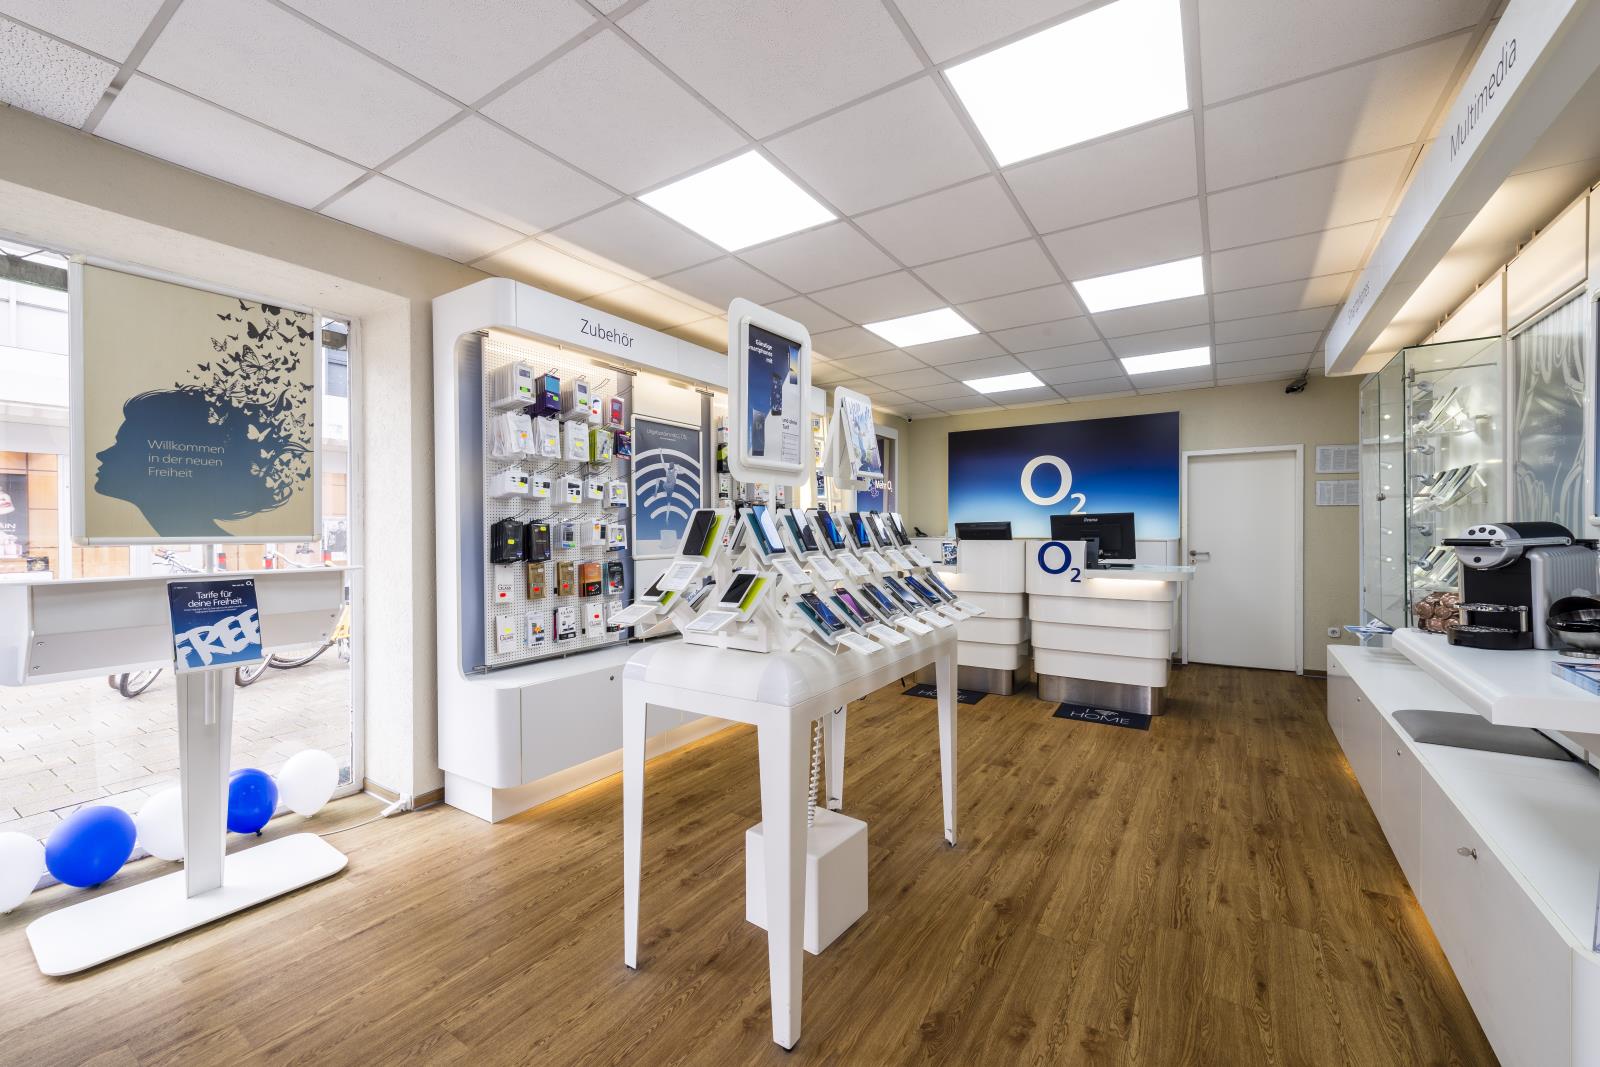 o2 Shop, Hohe Str. 42 in Wesel